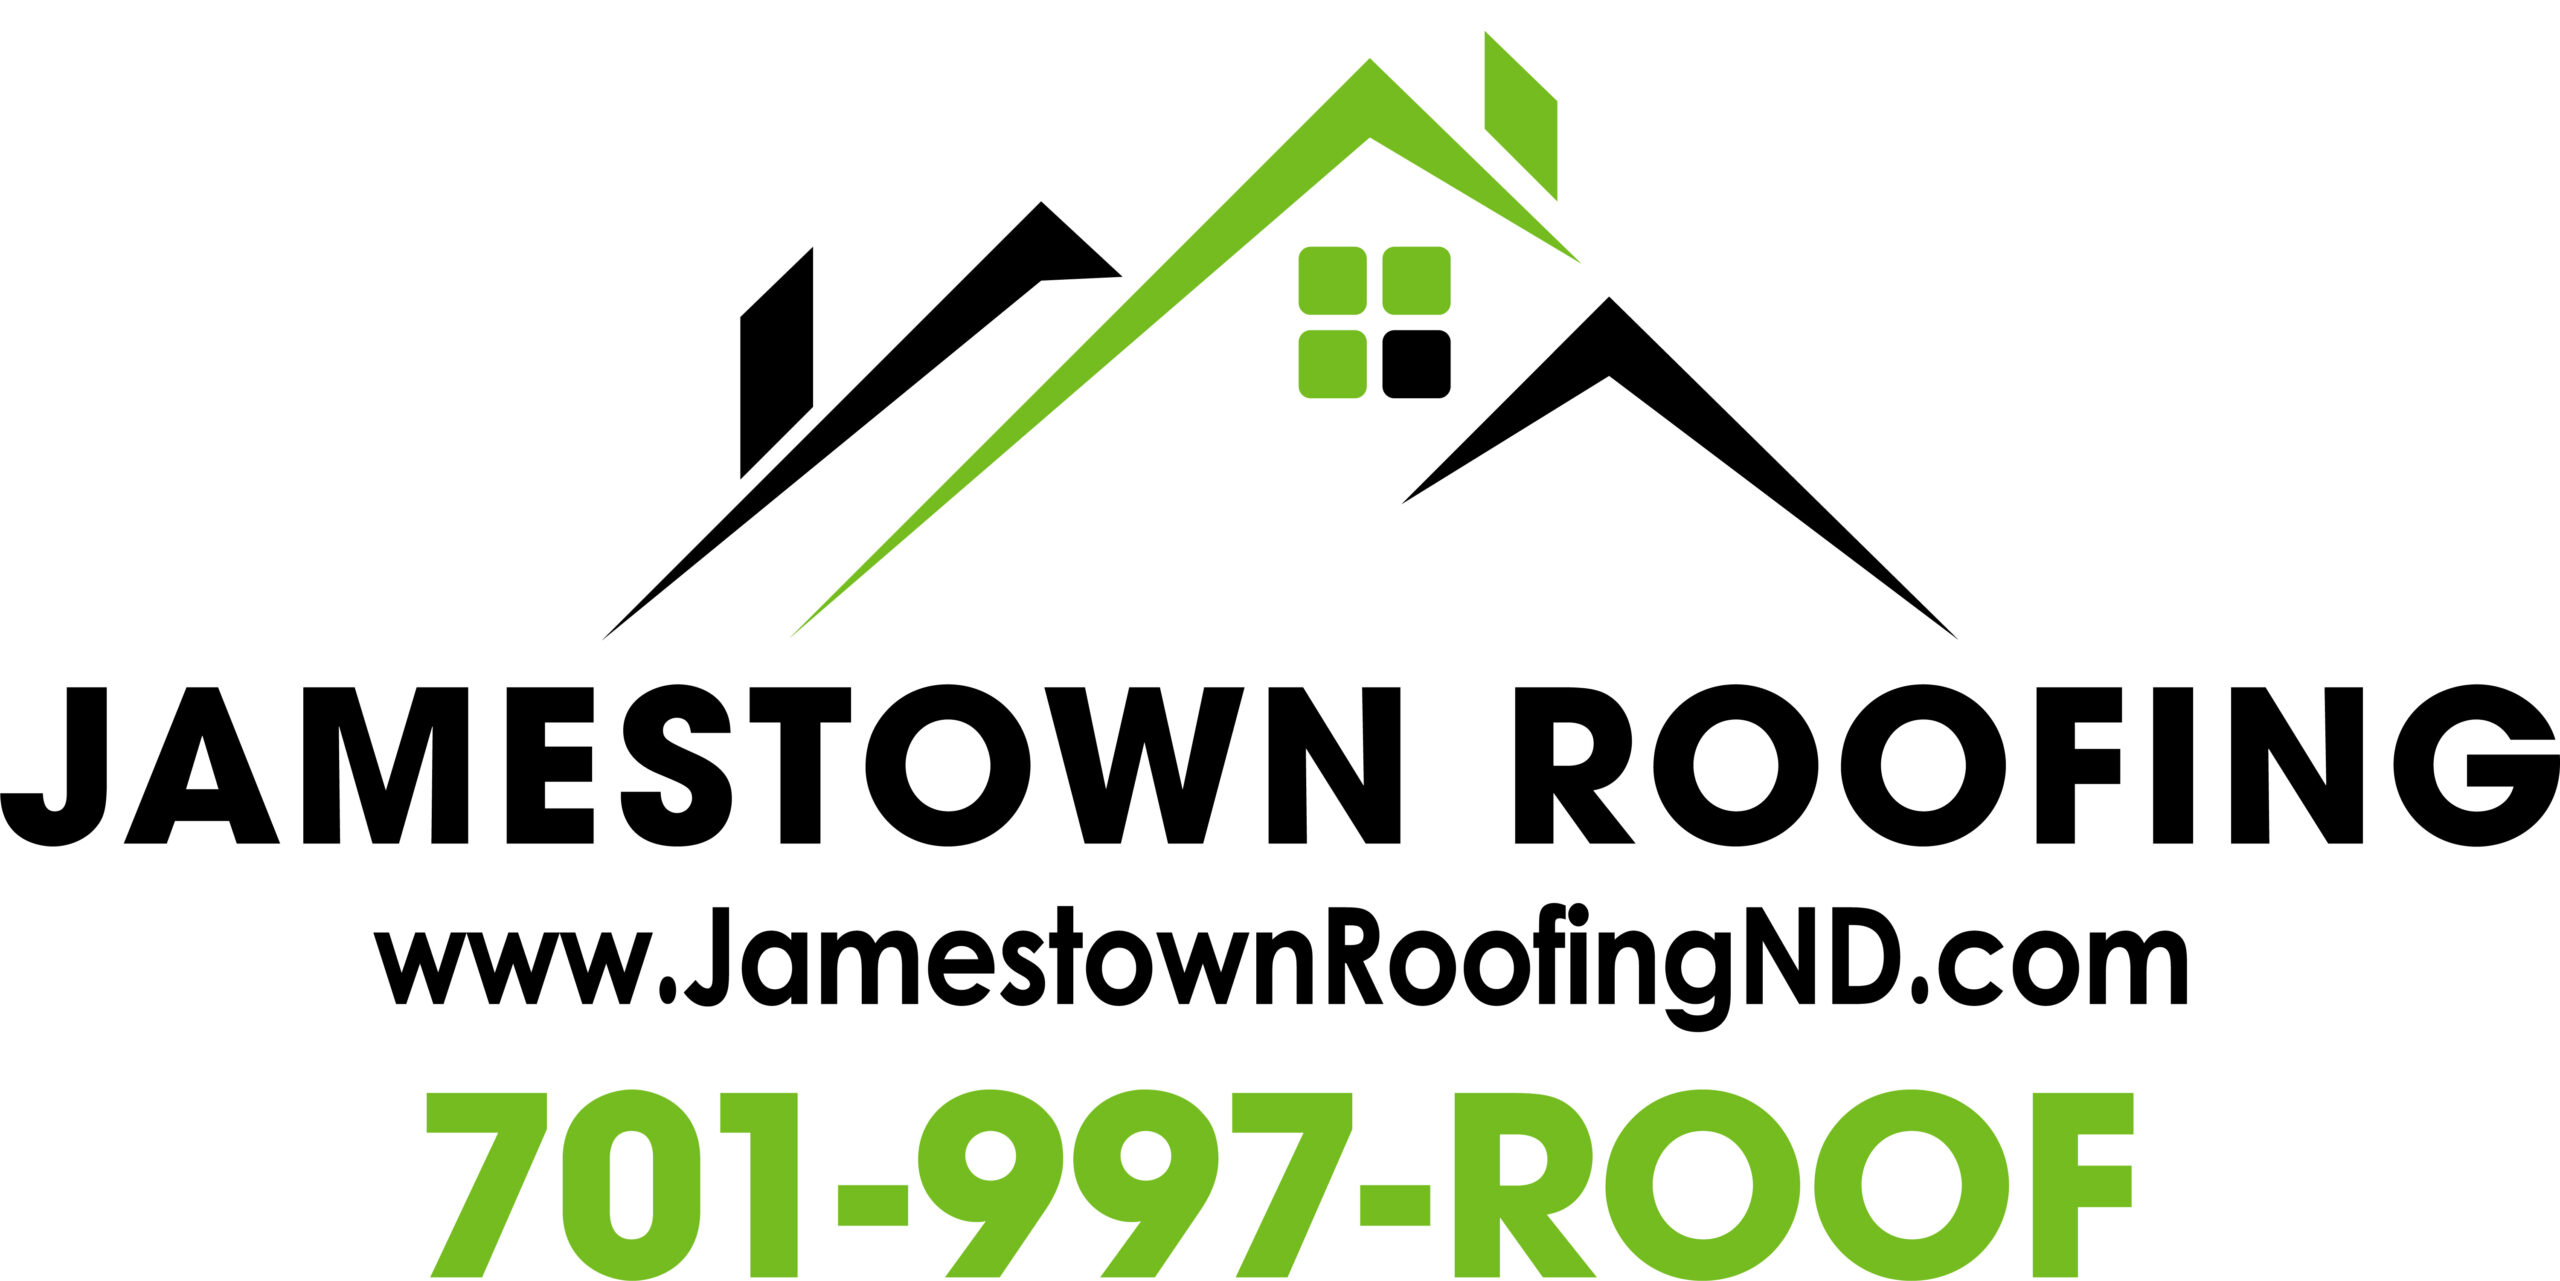 Jamestown Roofing Stacked